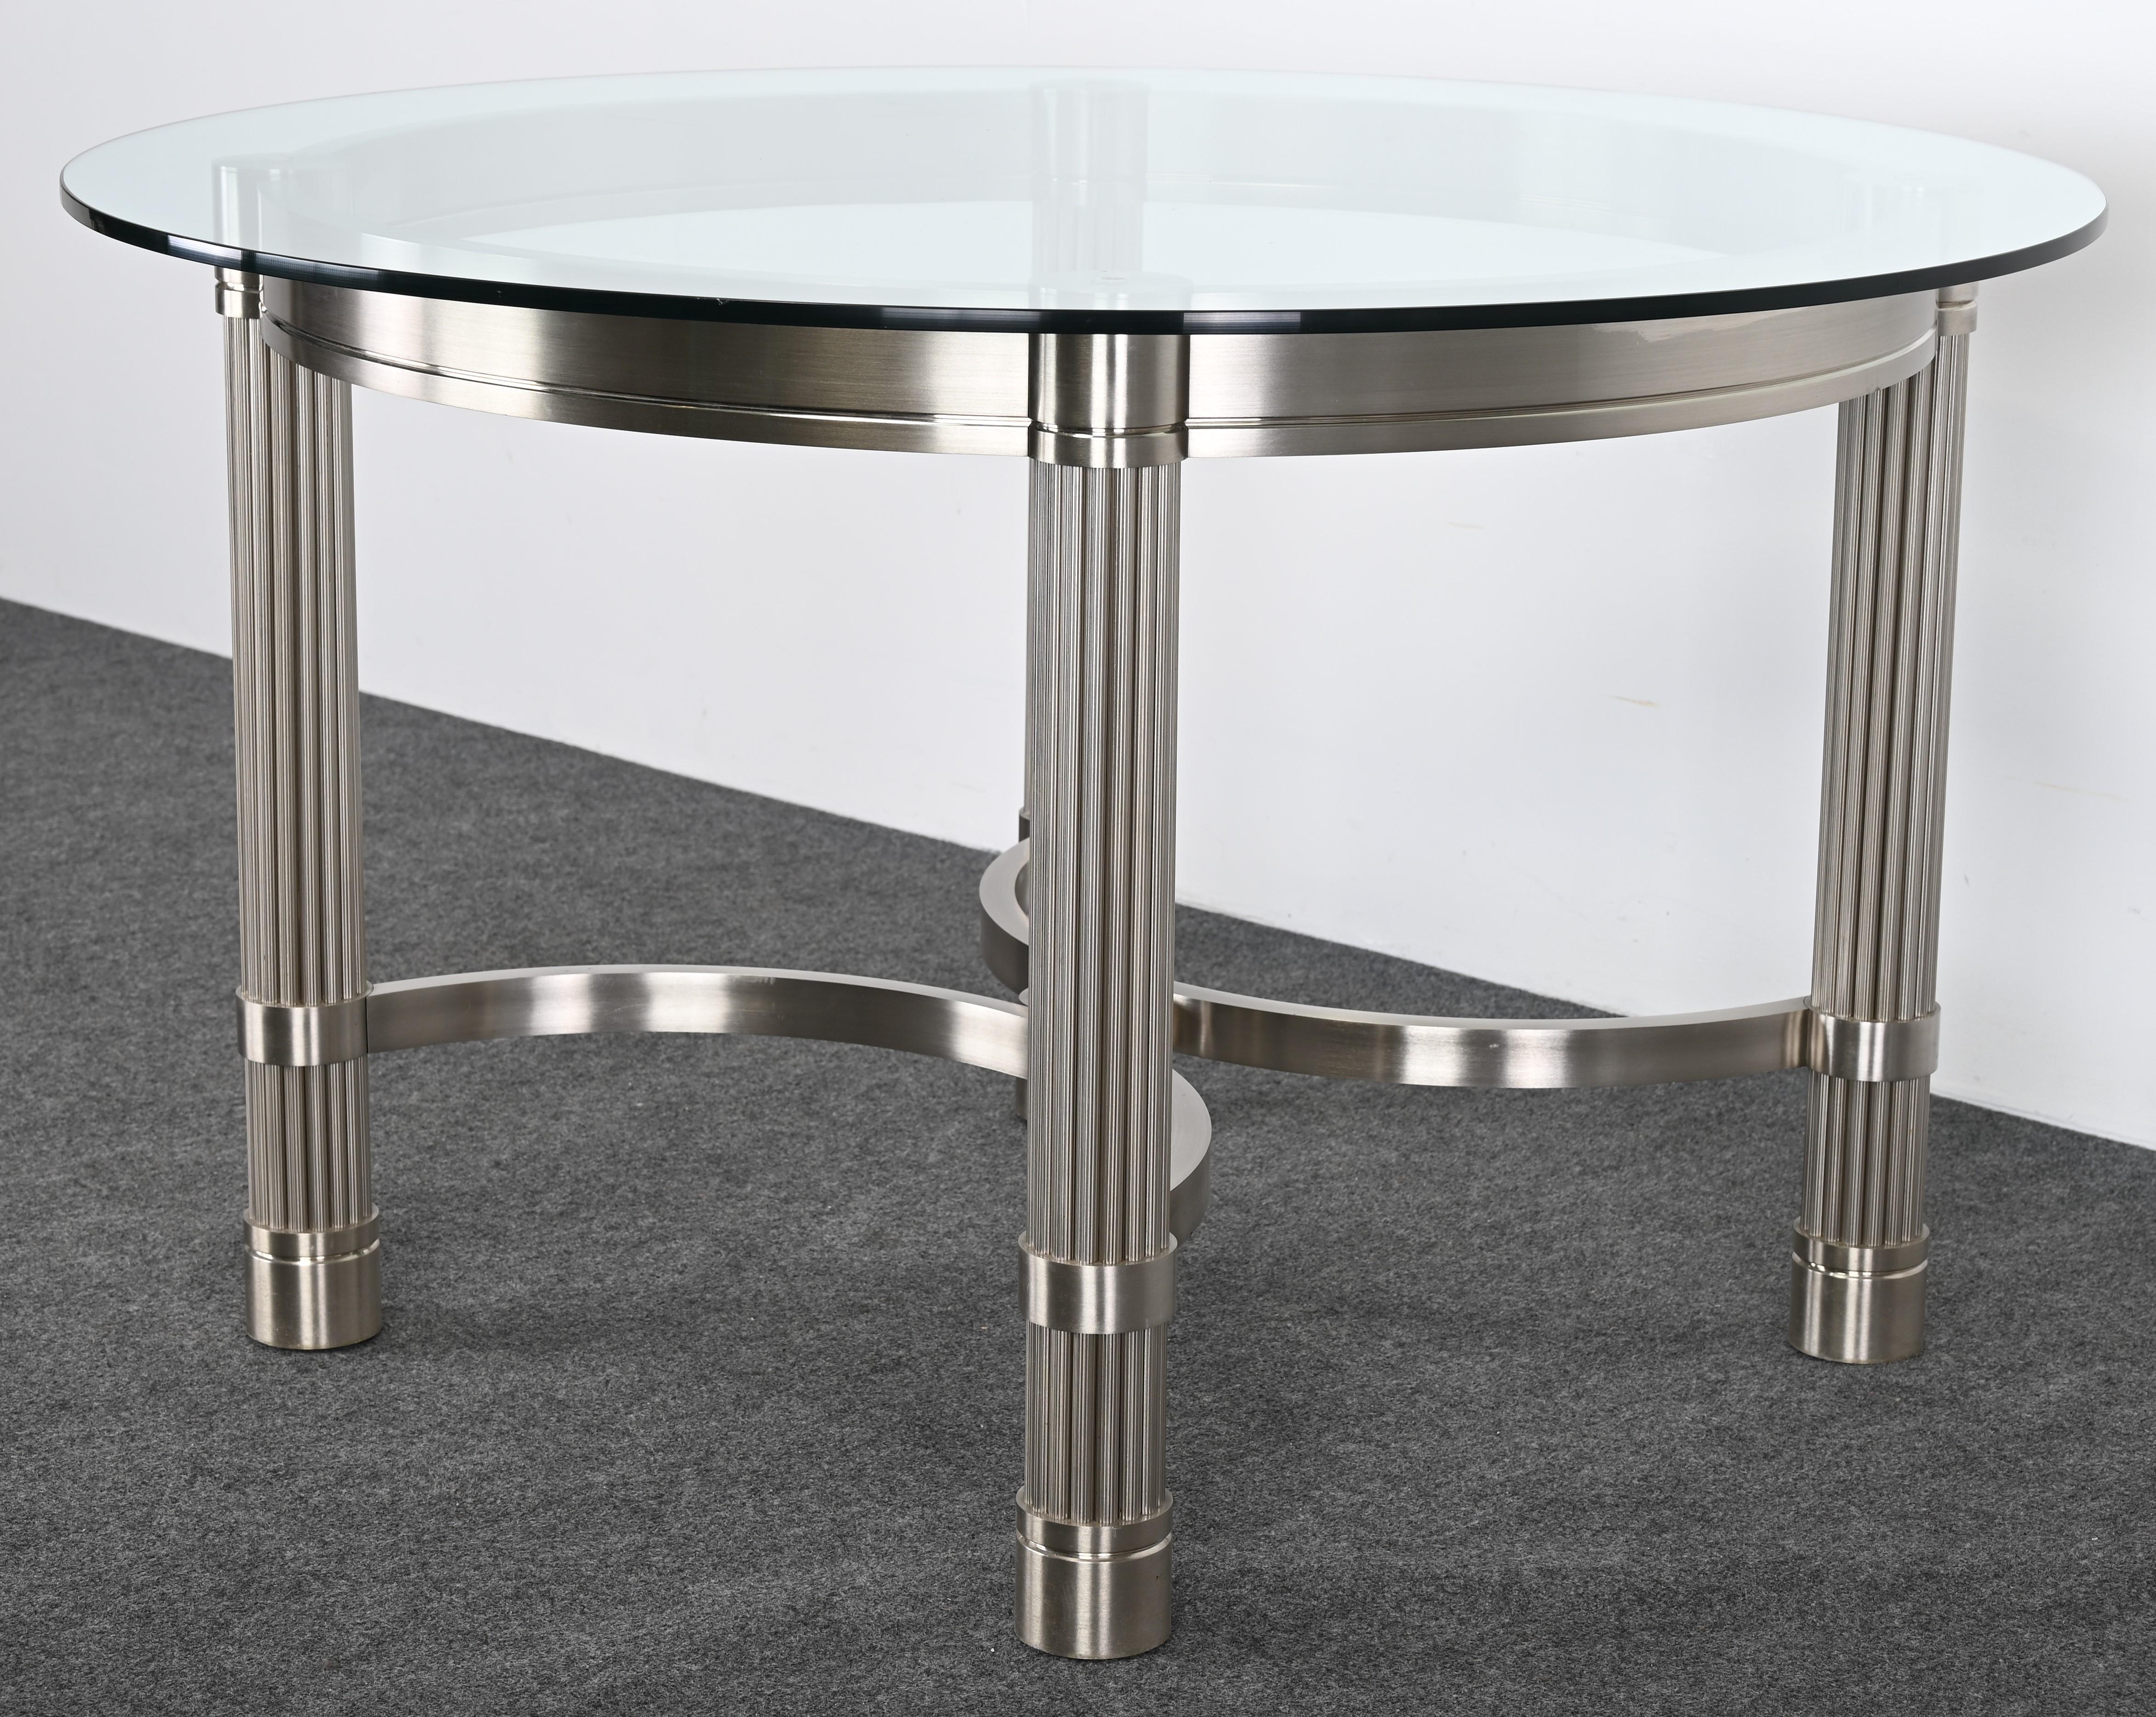 American Solid Stainless Steel Center or Dining Table by Ron Seff, 1980s For Sale